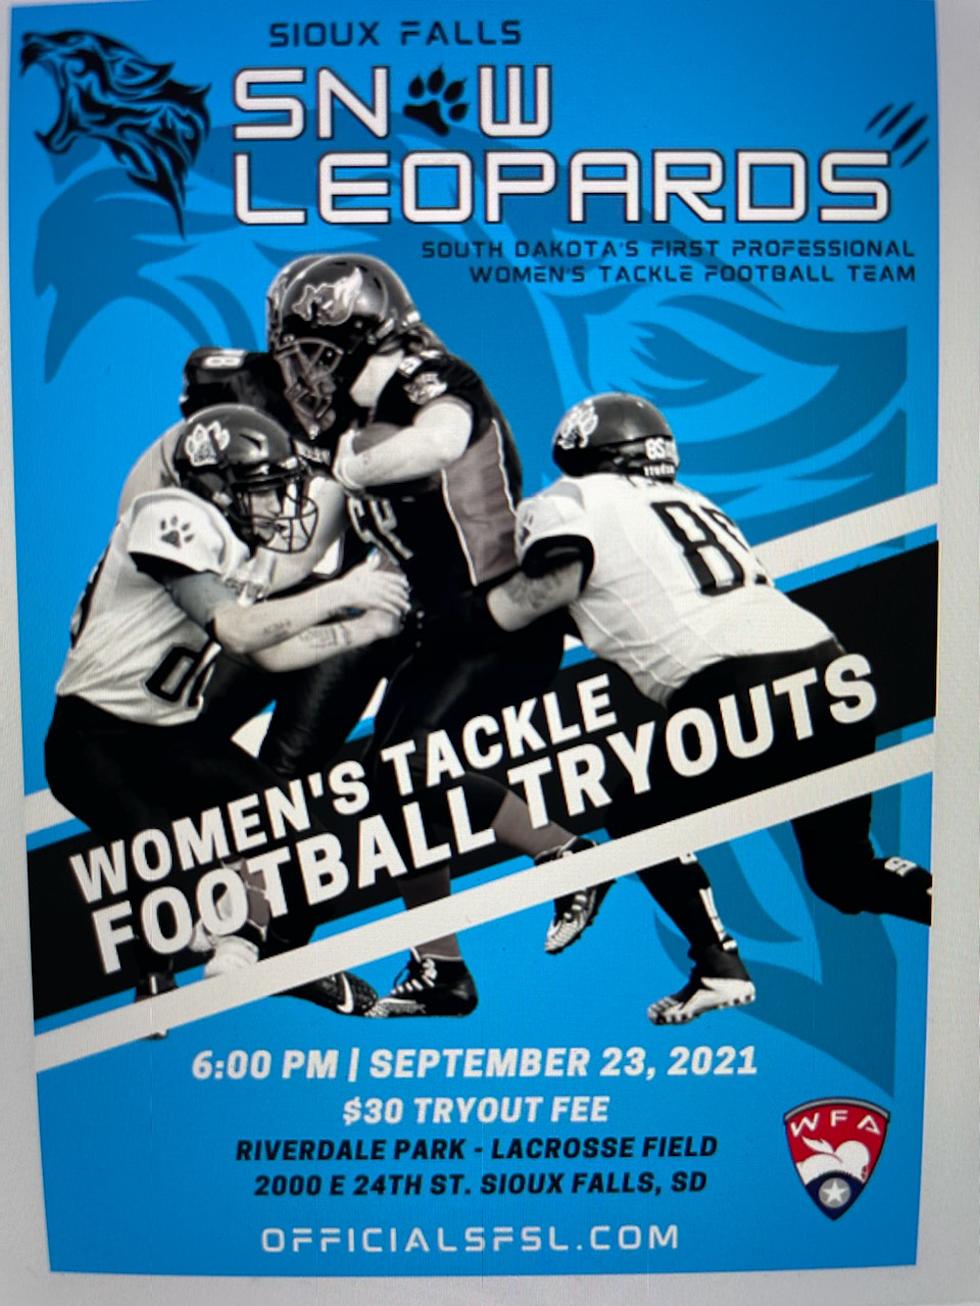 Women's Pro Football Tryouts In Sioux Falls Sept 23